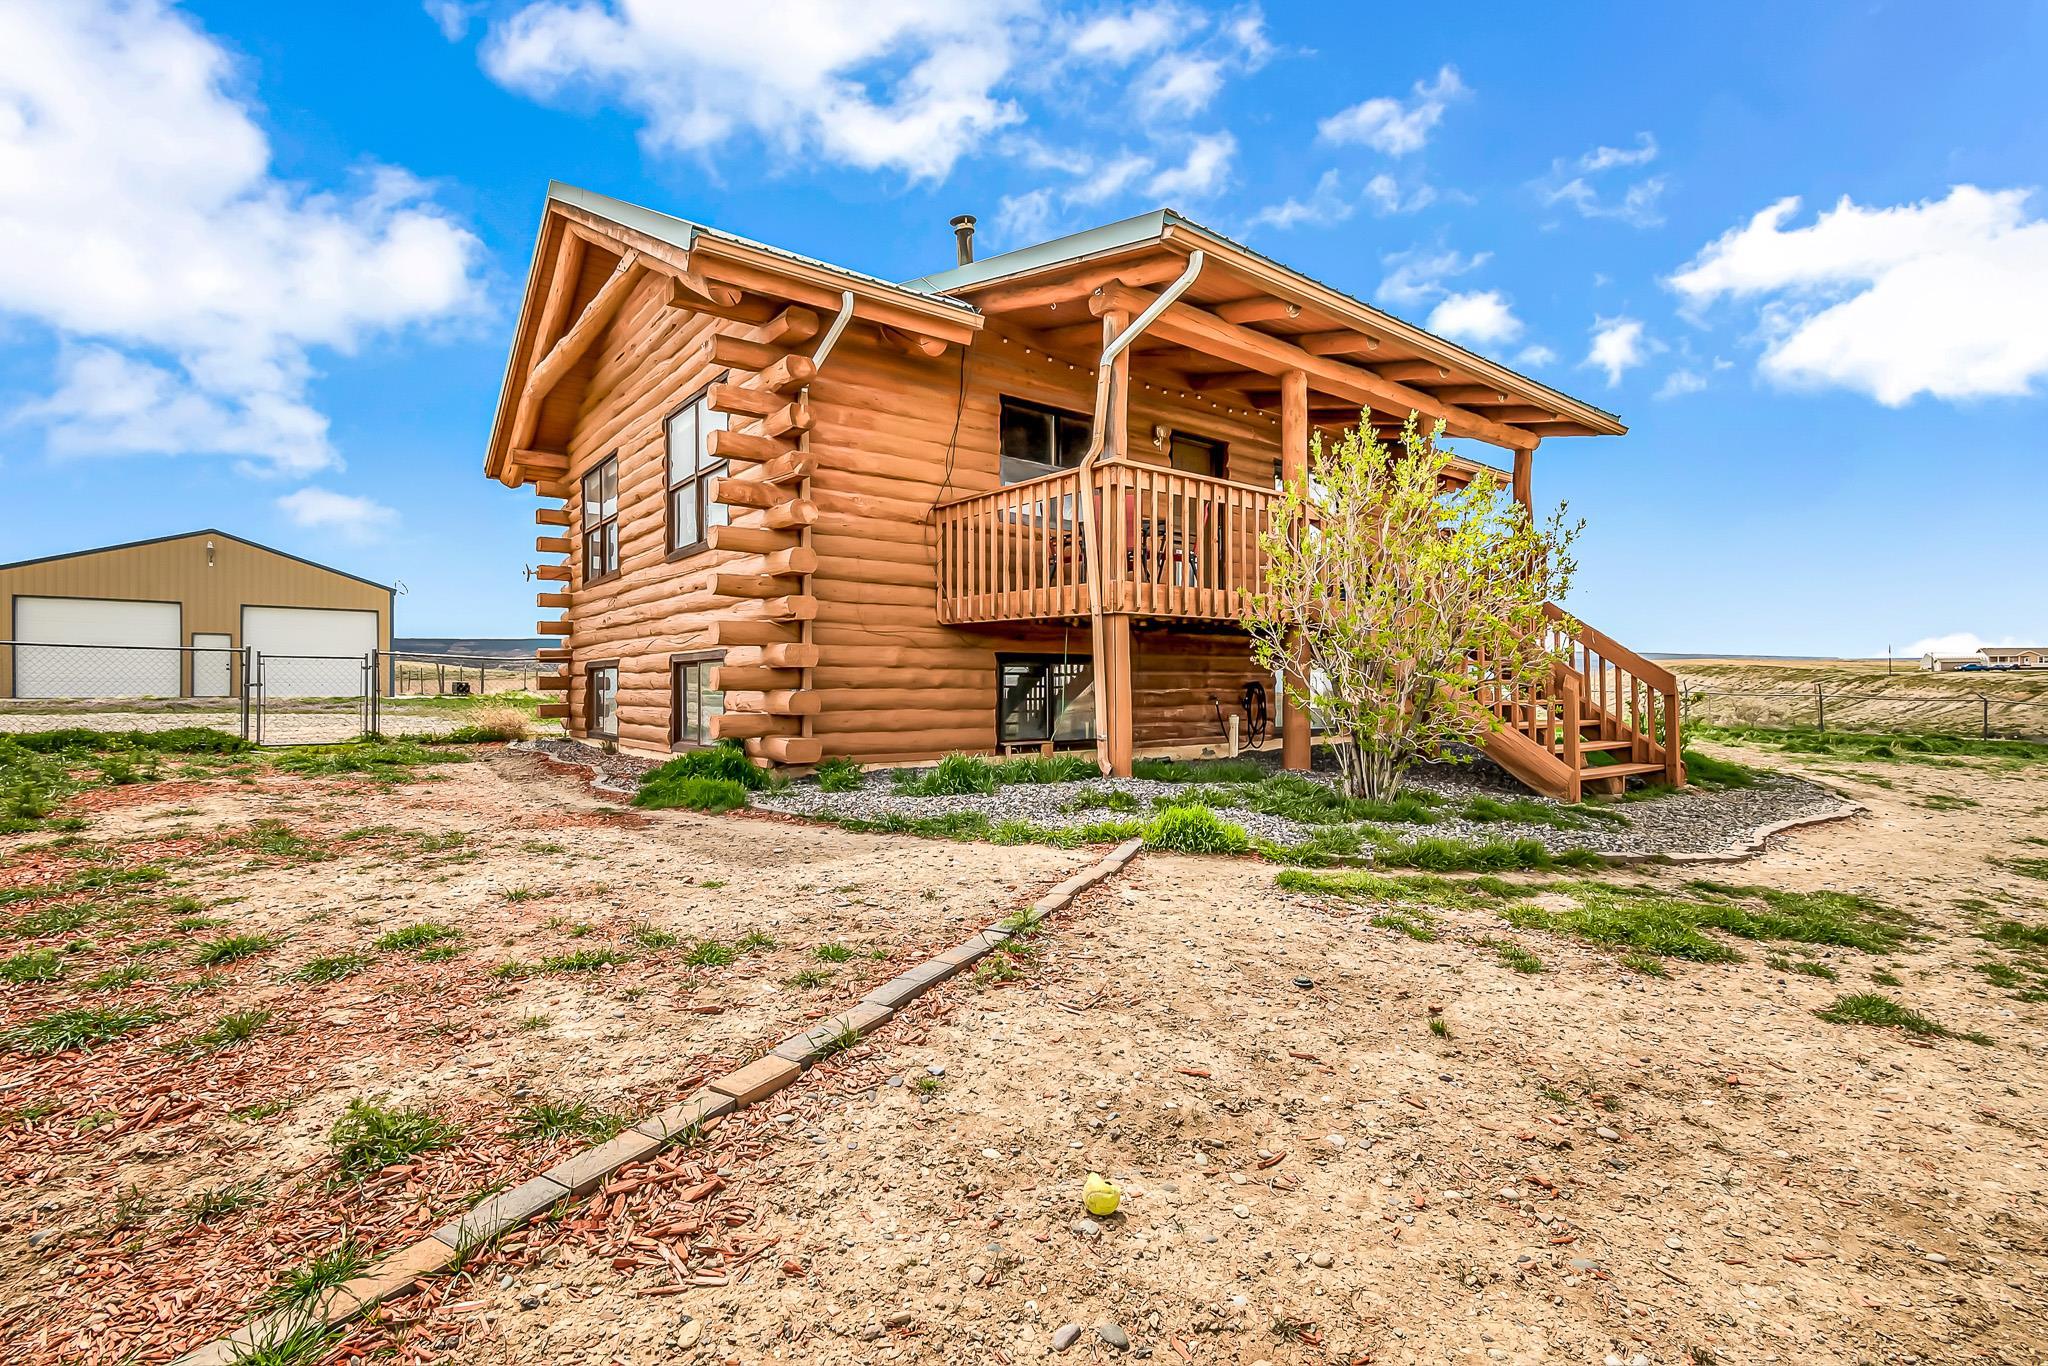 What a gem! You will be blown away by this Log Cabin home. Just minutes from downtown Grand Junction, the Grand Mesa, BLM land, and the Gunnison River. It's perfectly situated to captivate you with the amazing views. And plenty of land to call your own. You'll have ample space for all your toys with the large detached shop and the attached two car garage. Previously a 3 bedroom home, you may easily add the wall and have the extra bedroom if you feel the need to. With owned Solar, this can't be beat! Schedule your showing today!   *Home is Verified with Pre-Inspection taking place Monday and comes with a Buyer's Home Warranty at Close.